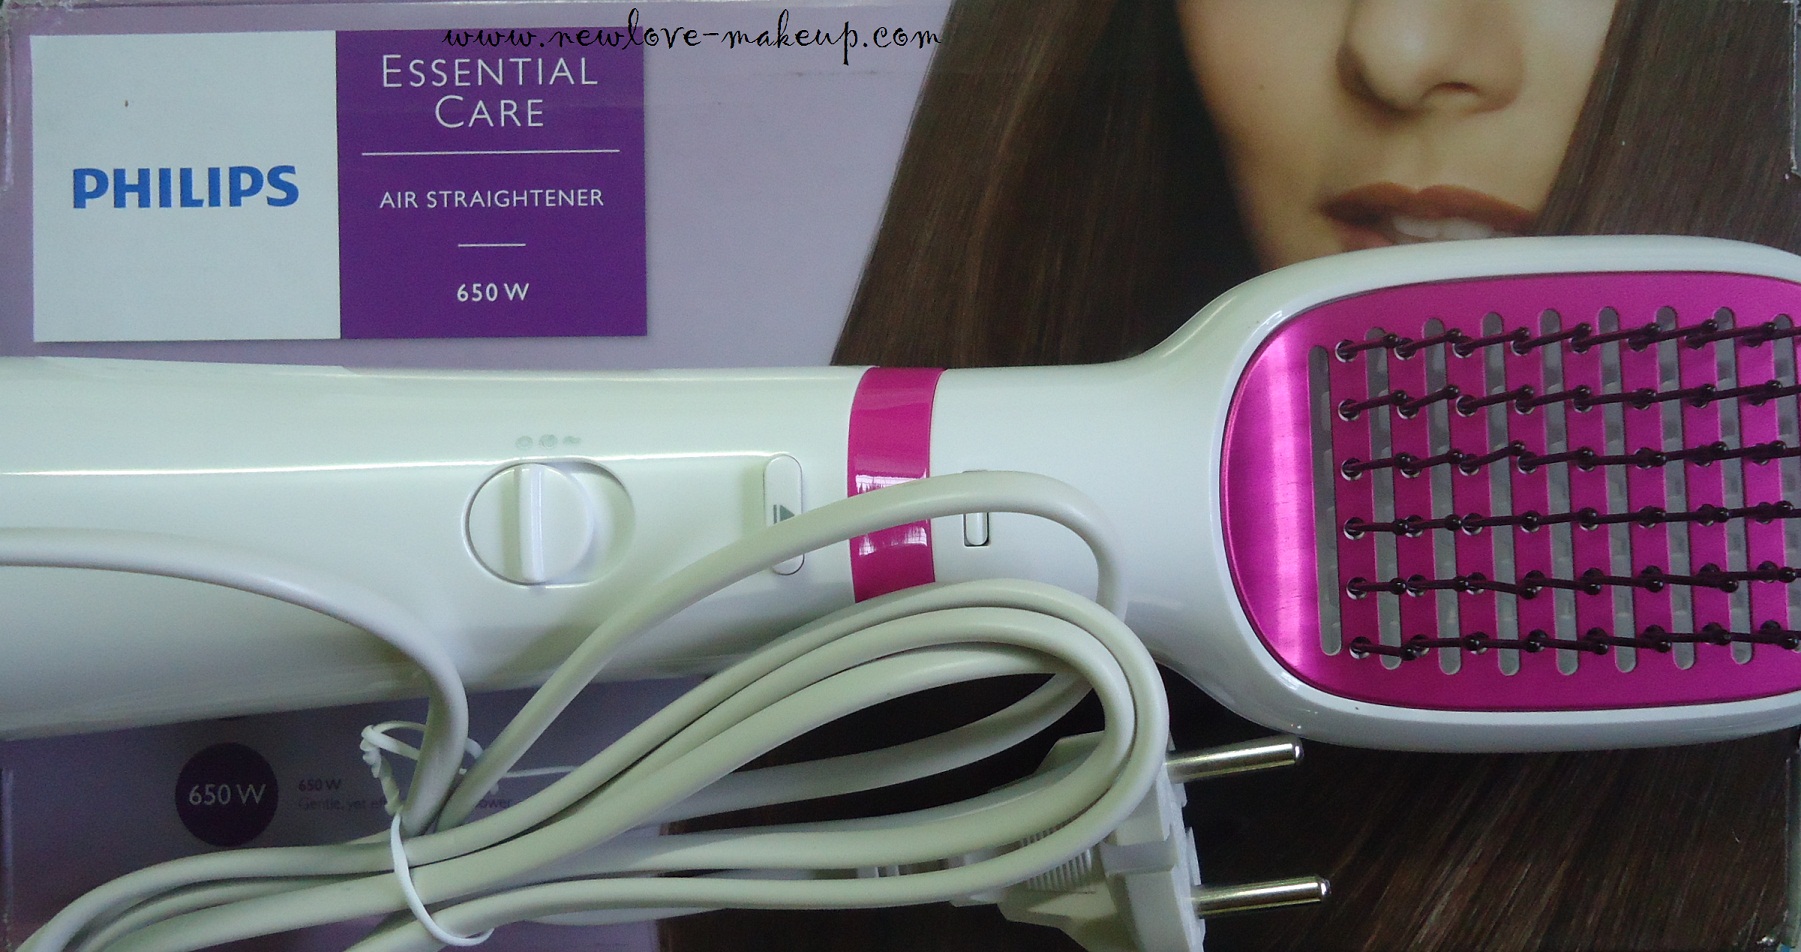 Philips Essential Care Air Straightener HP8658 Review - New Love - Makeup